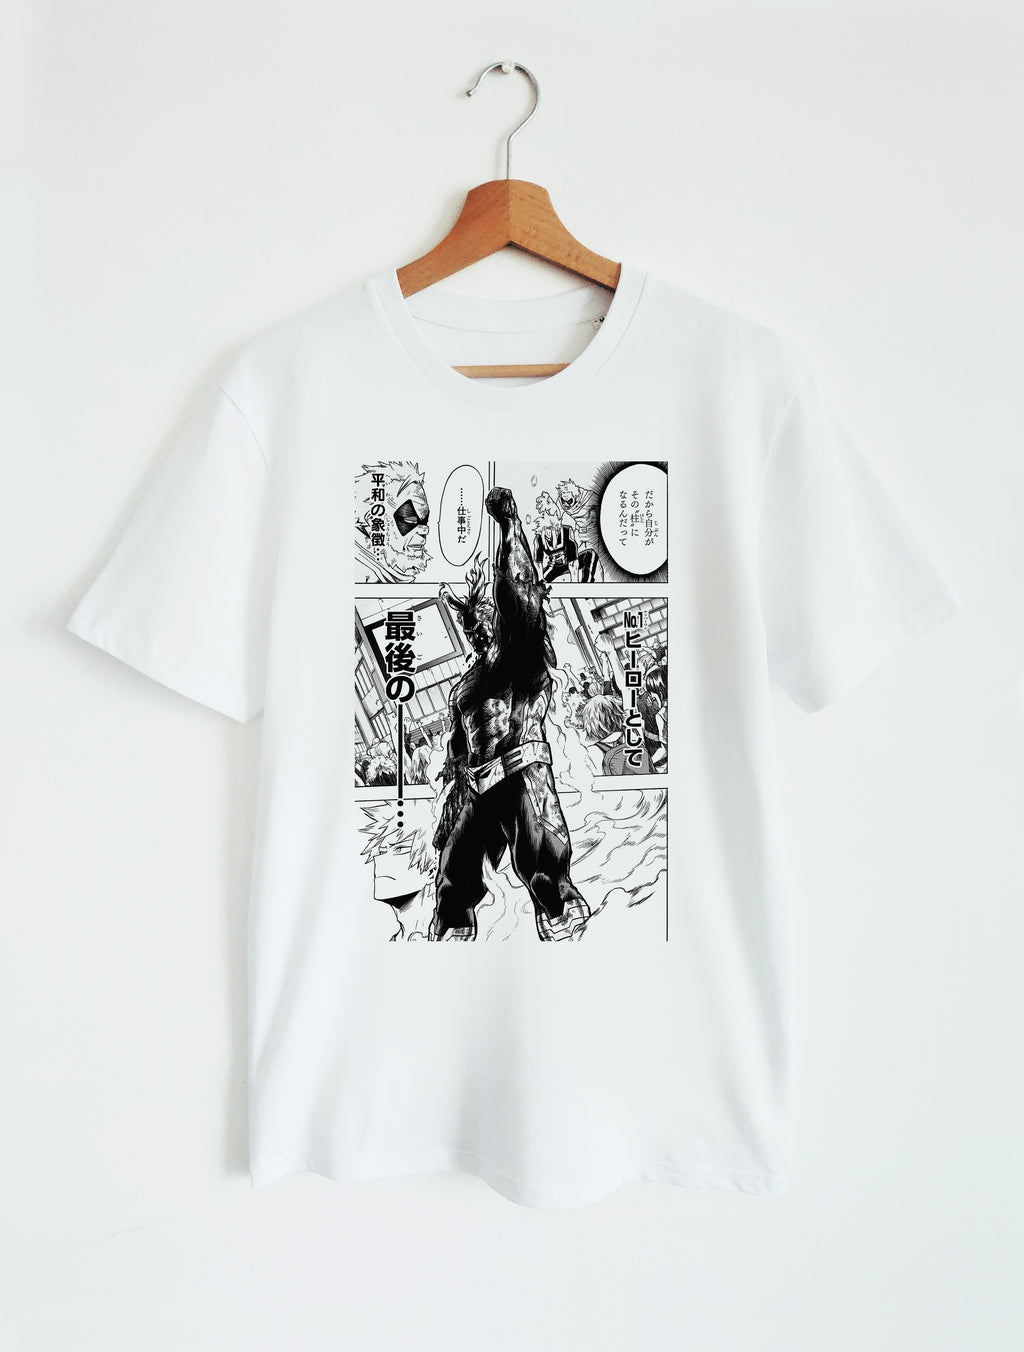 T-SHIRT WHITE UNISEX | MY HERO ACADEMIA - ALL MIGHT “VICTORY”